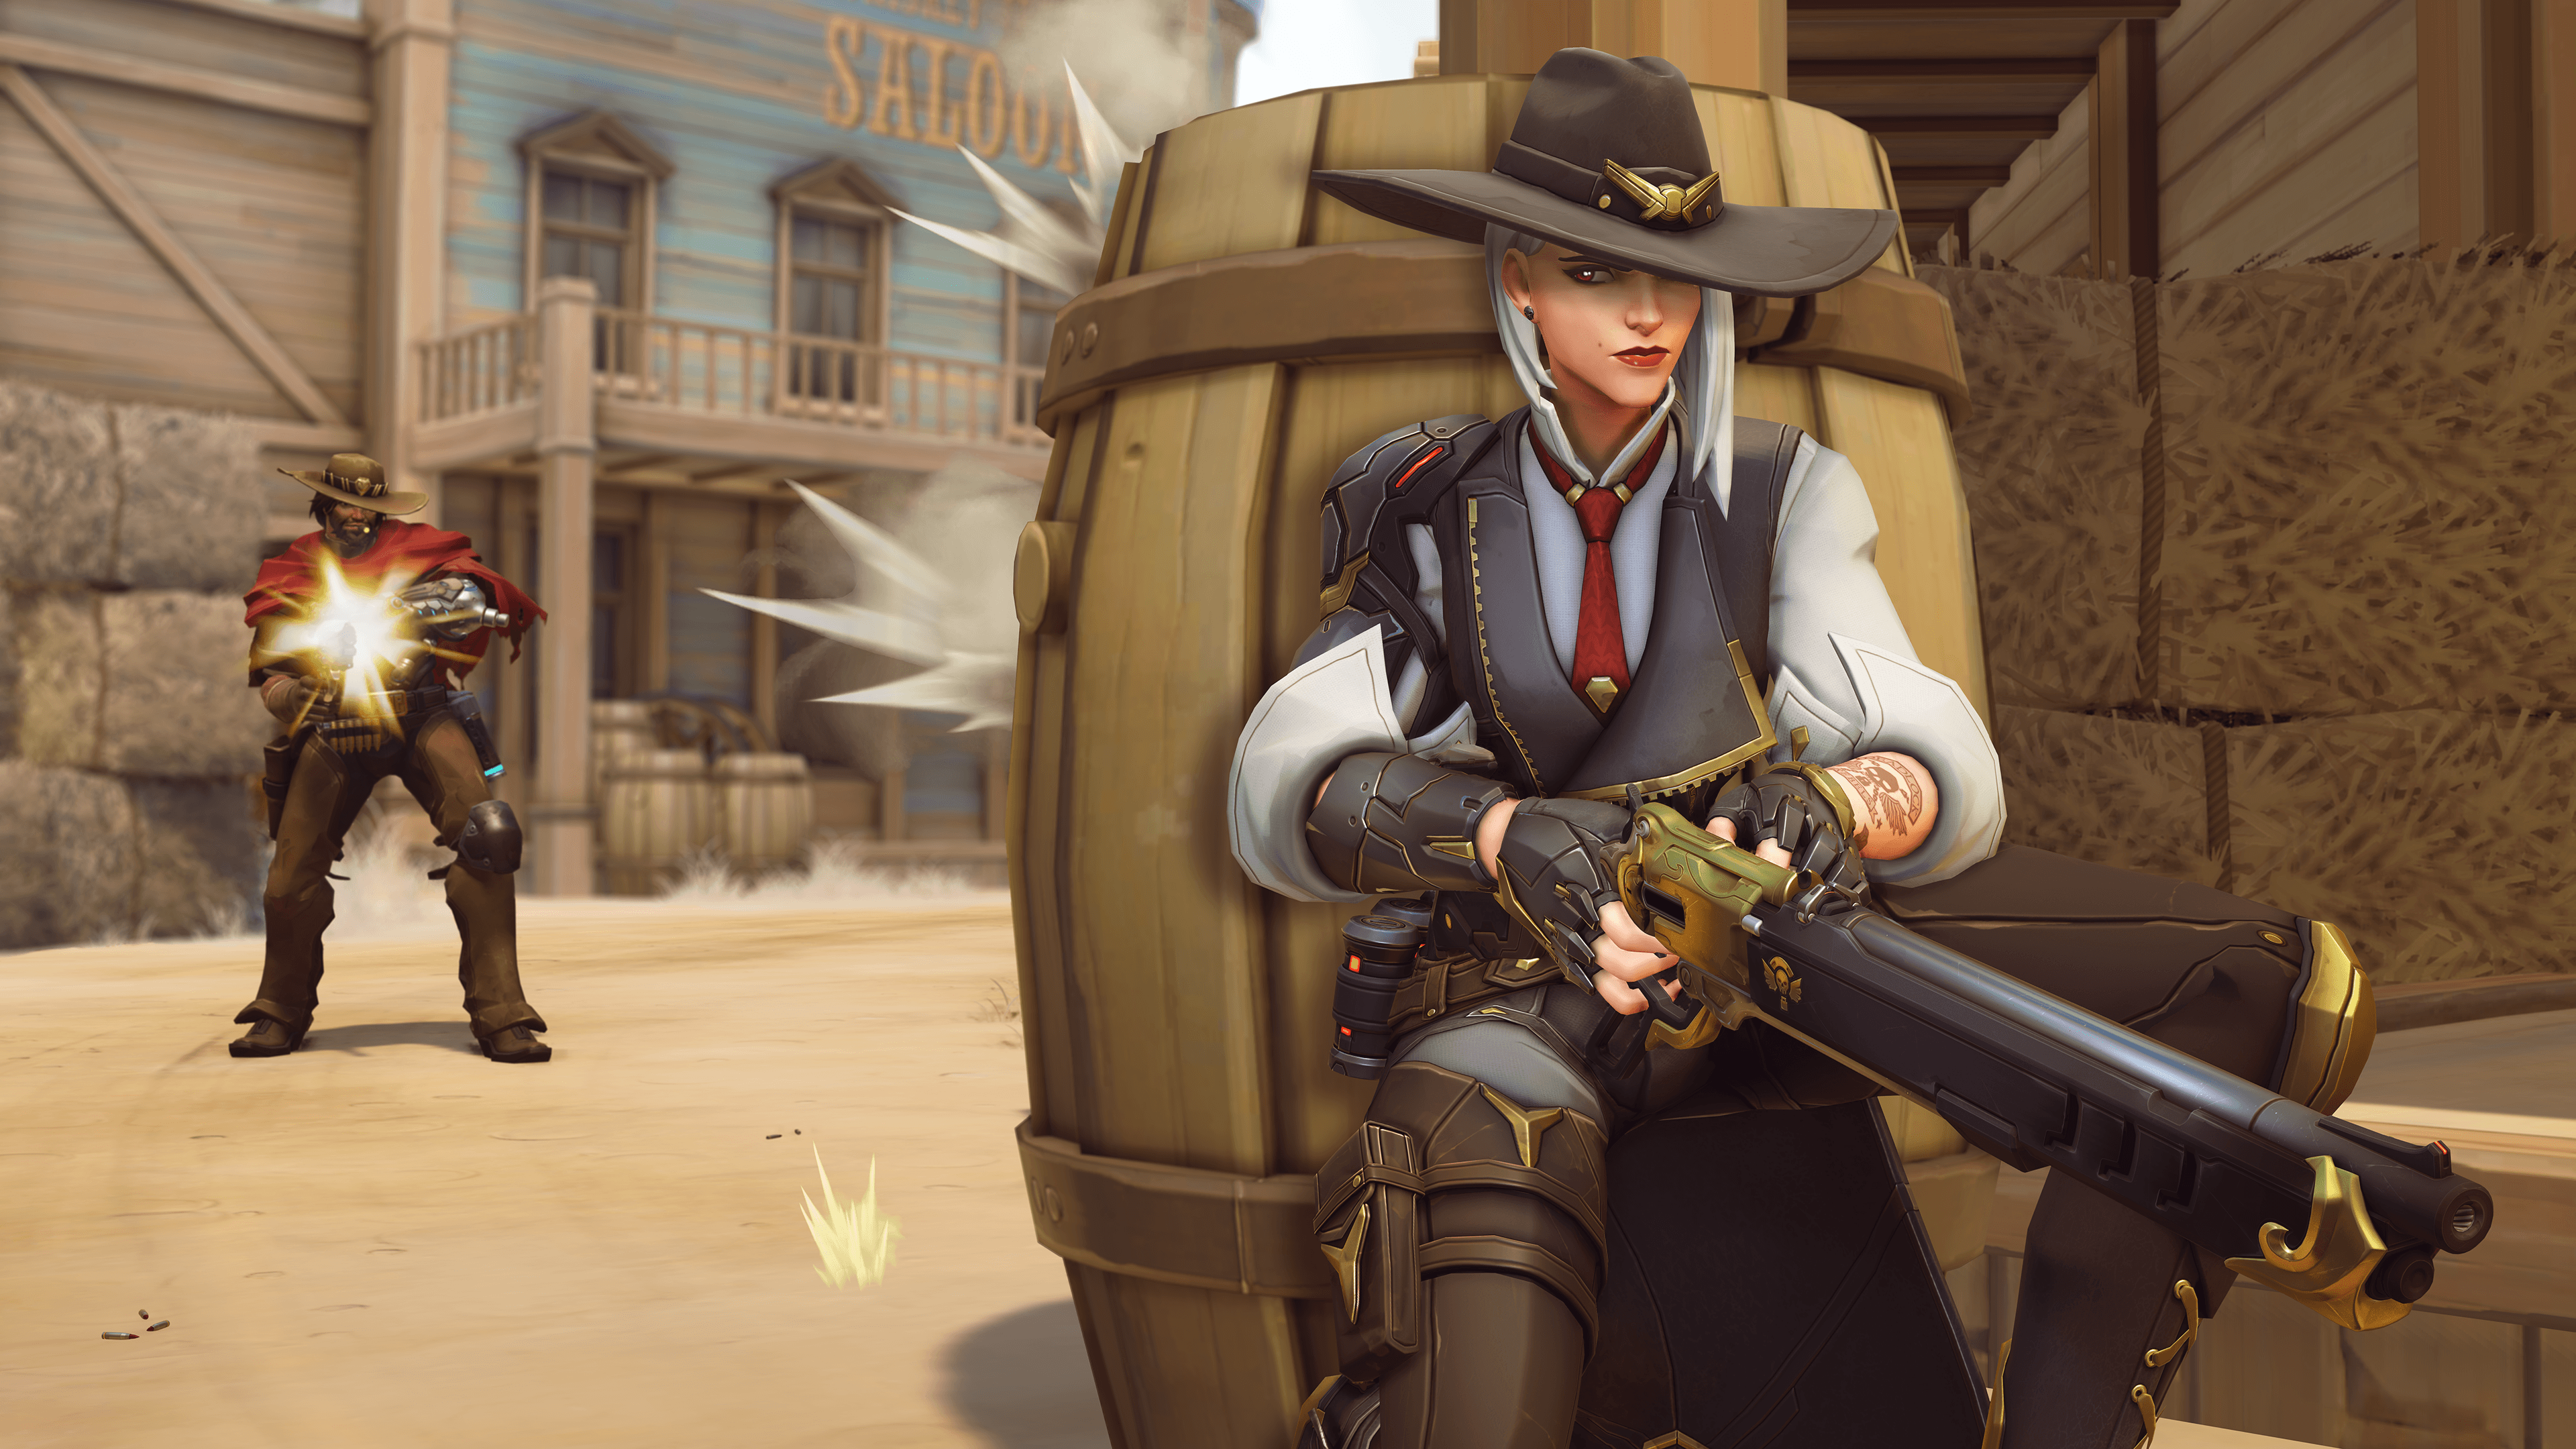 Overwatch's next character is a gunslinger named Ashe